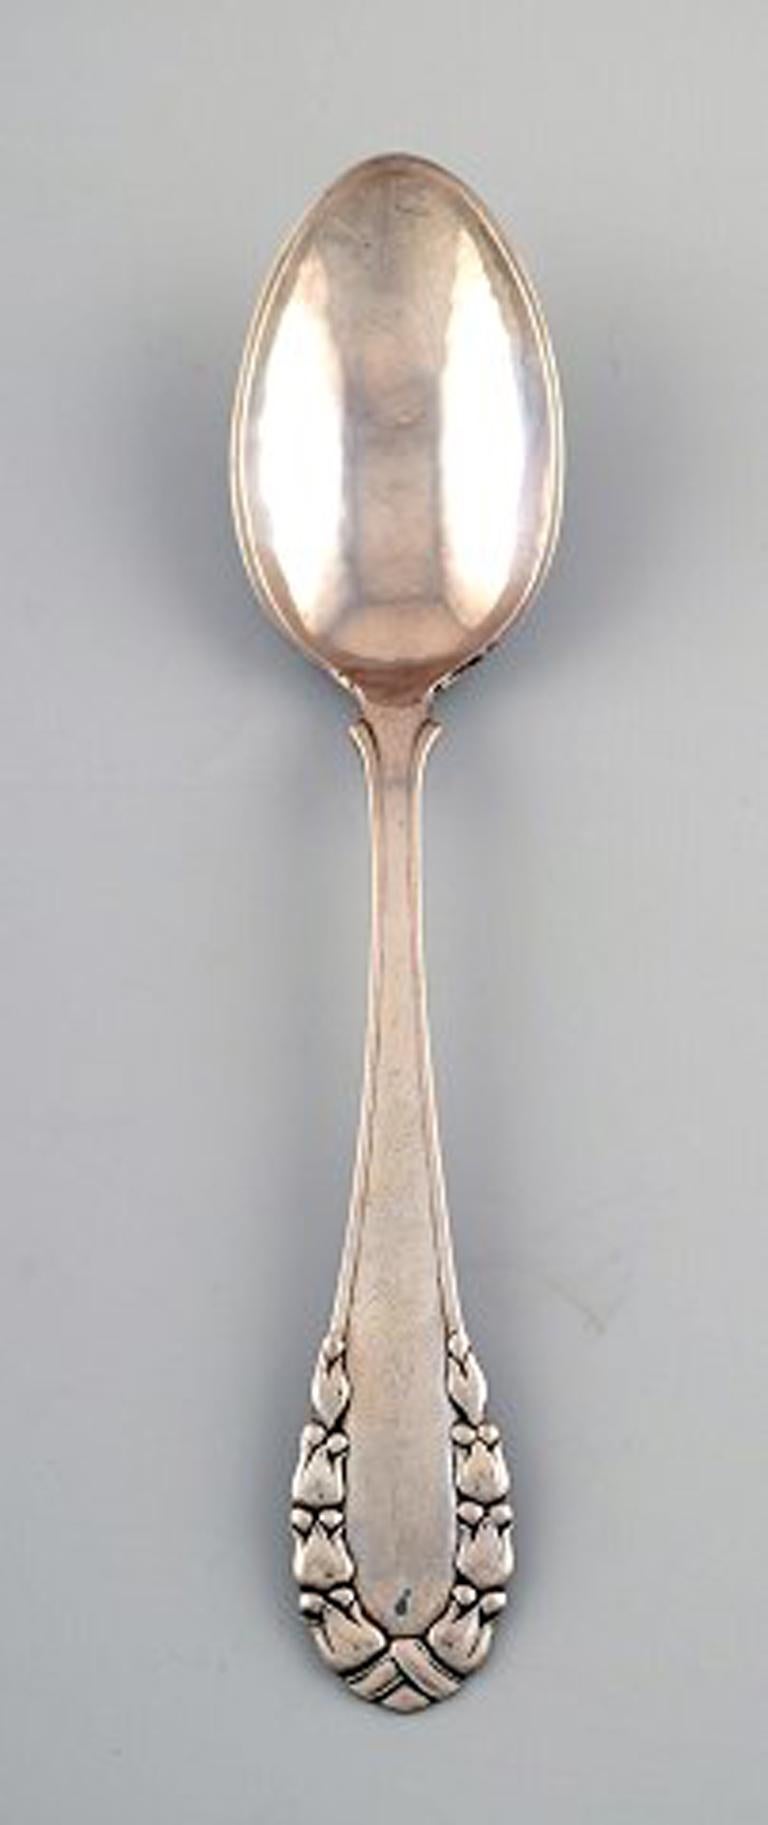 Georg Jensen Lily of the valley silver large soup/dinner spoon.
Two-piece
Measures: 20.5 cm.
In perfect condition.
Early stamp.
Designed by Georg Jensen in 1913.